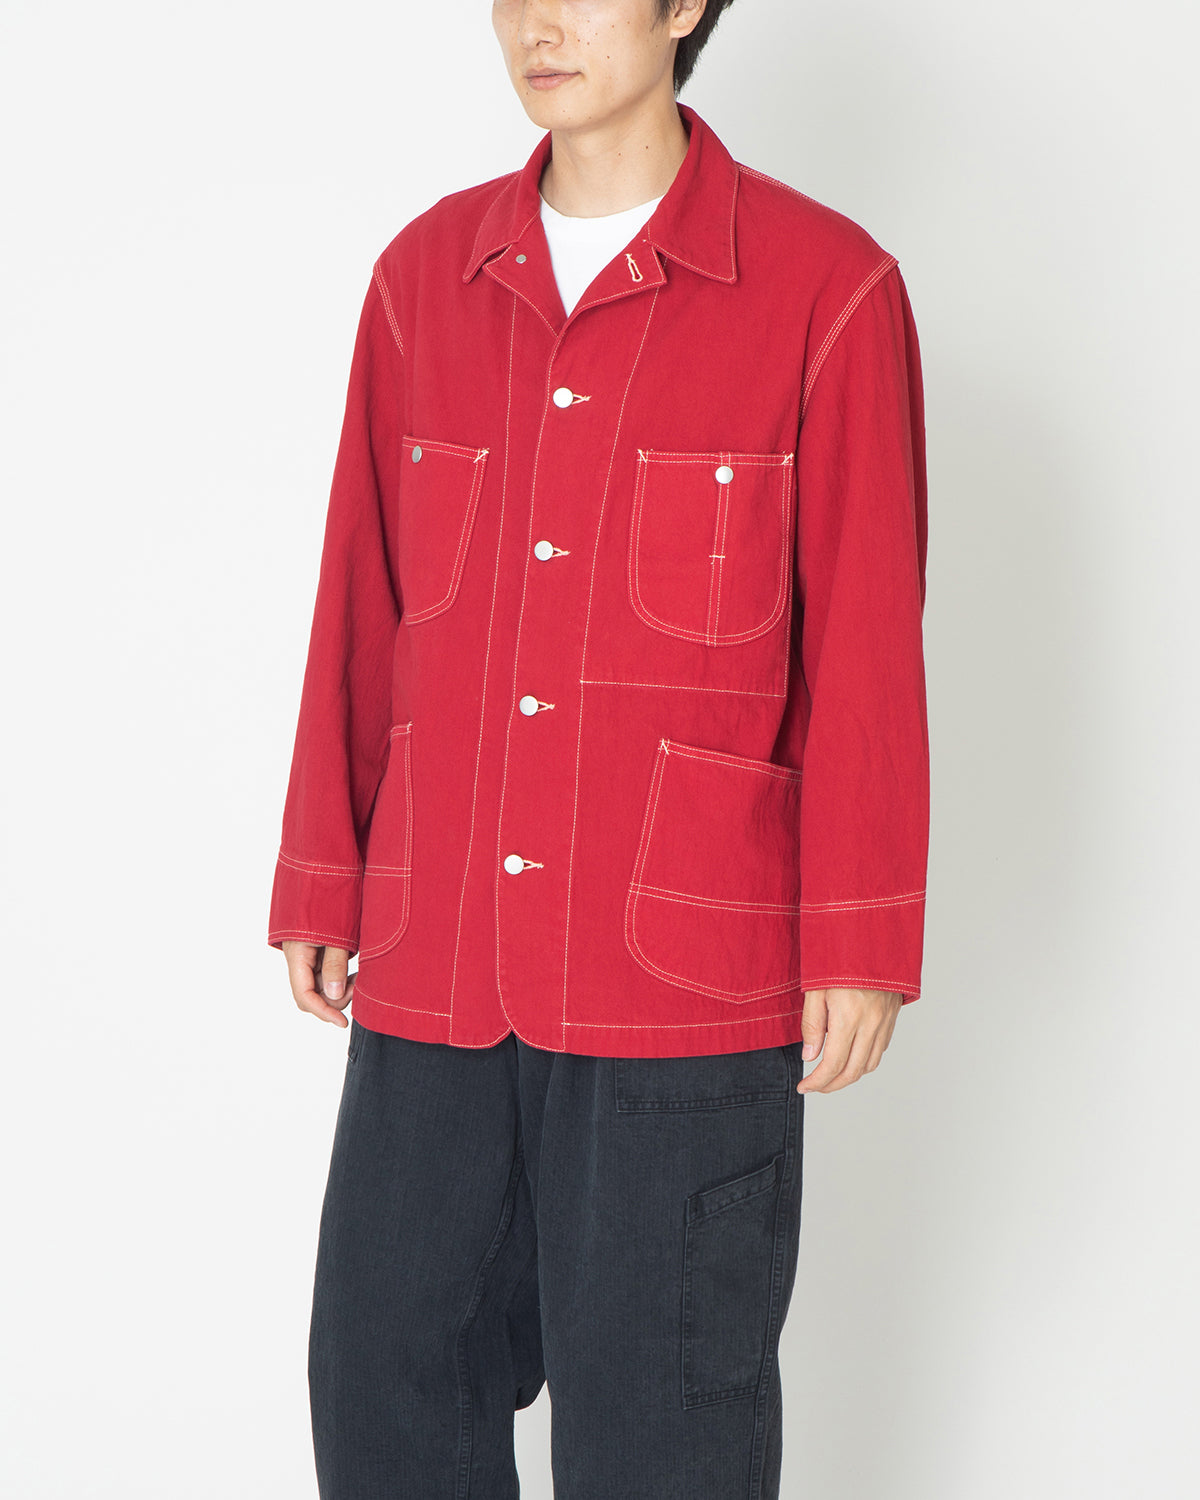 A.PRESSE Coverall Jacket